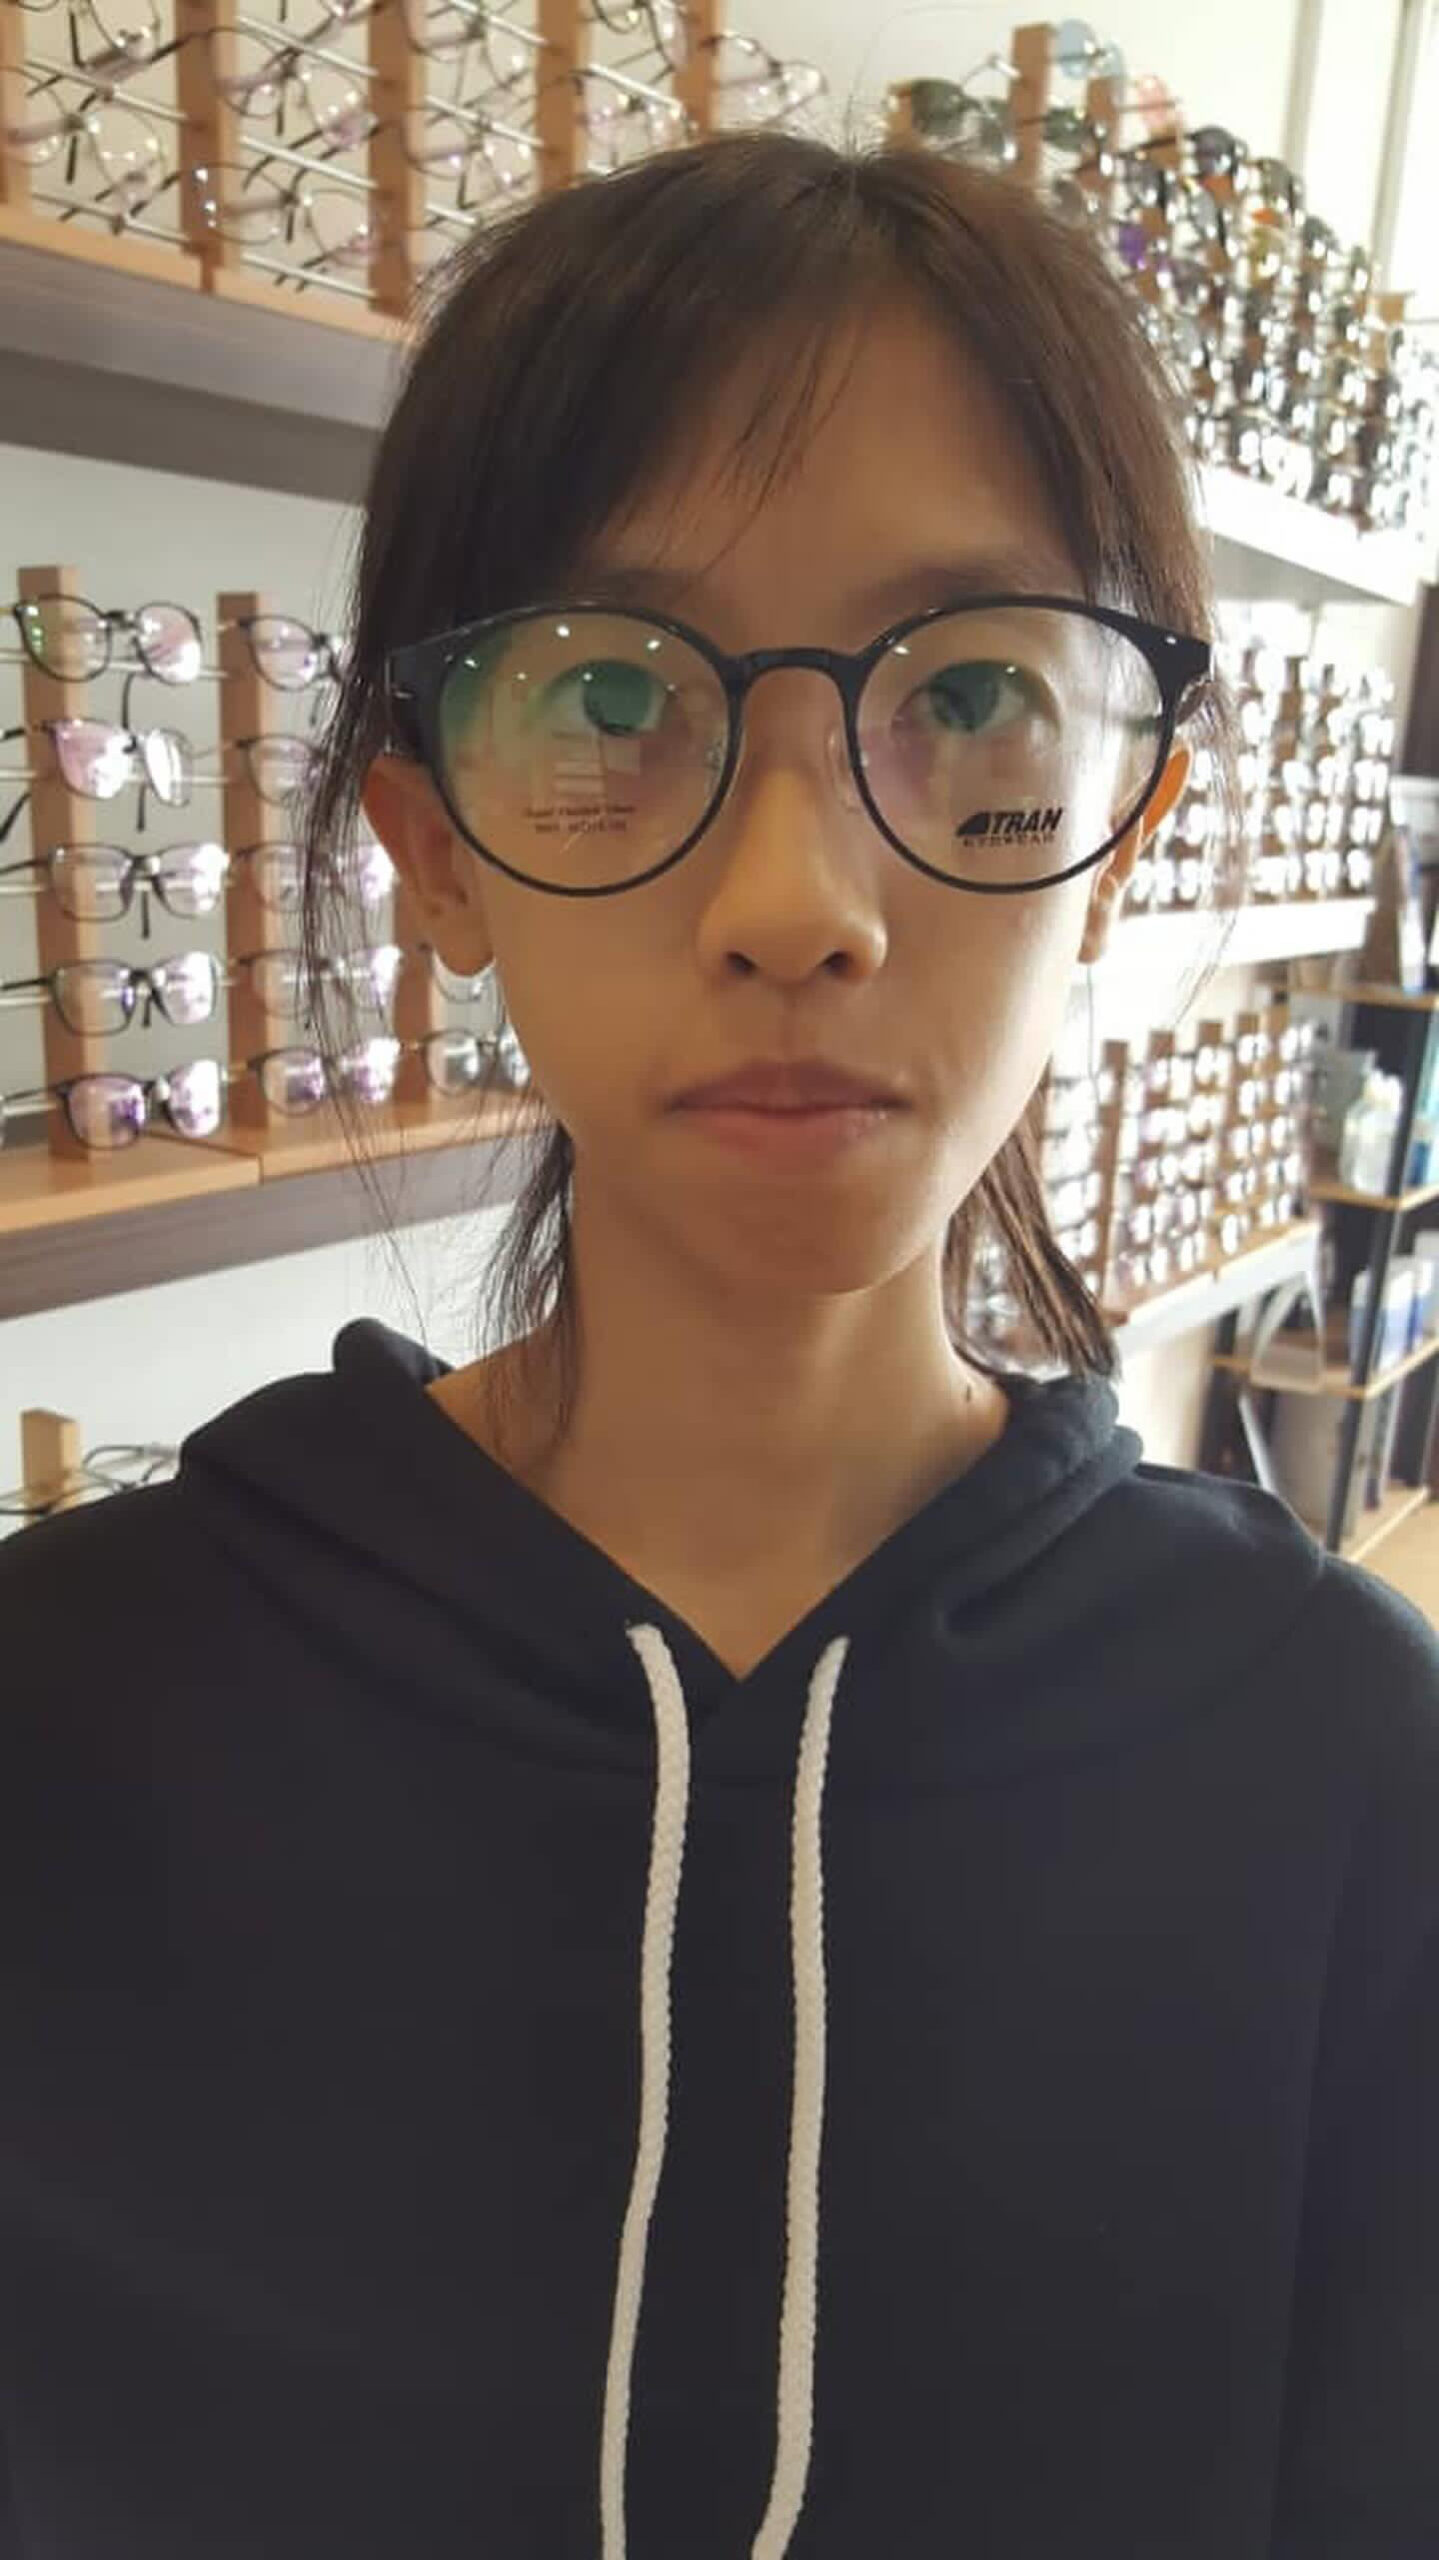 Fion with anorexia trying new specs. Jpg